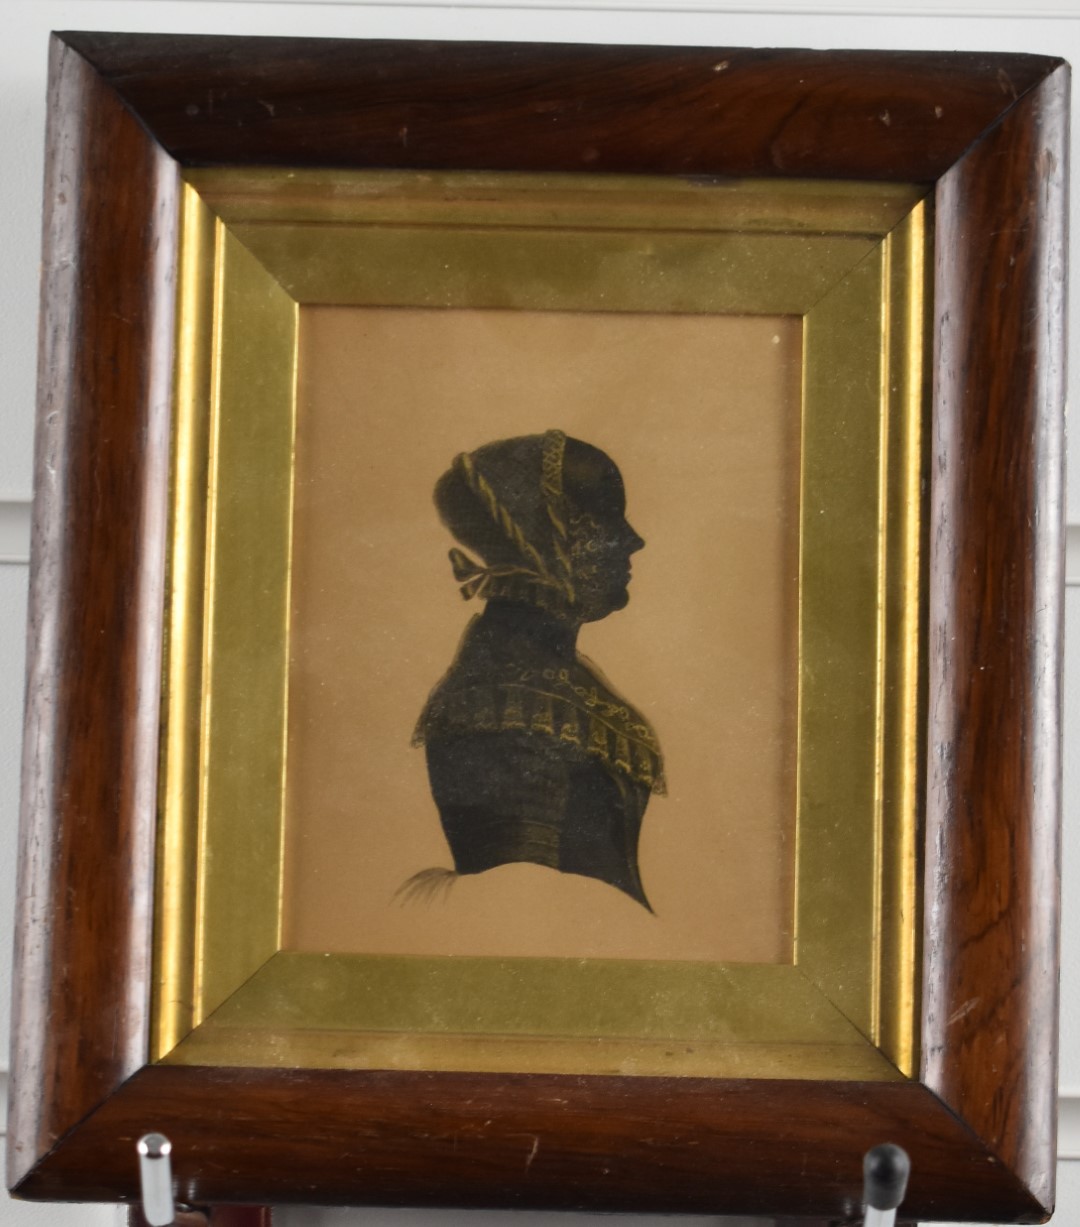 19thC silouhette portrait of a lady with gold highlights, 11 x 8.5cm, in period gilt and rosewood